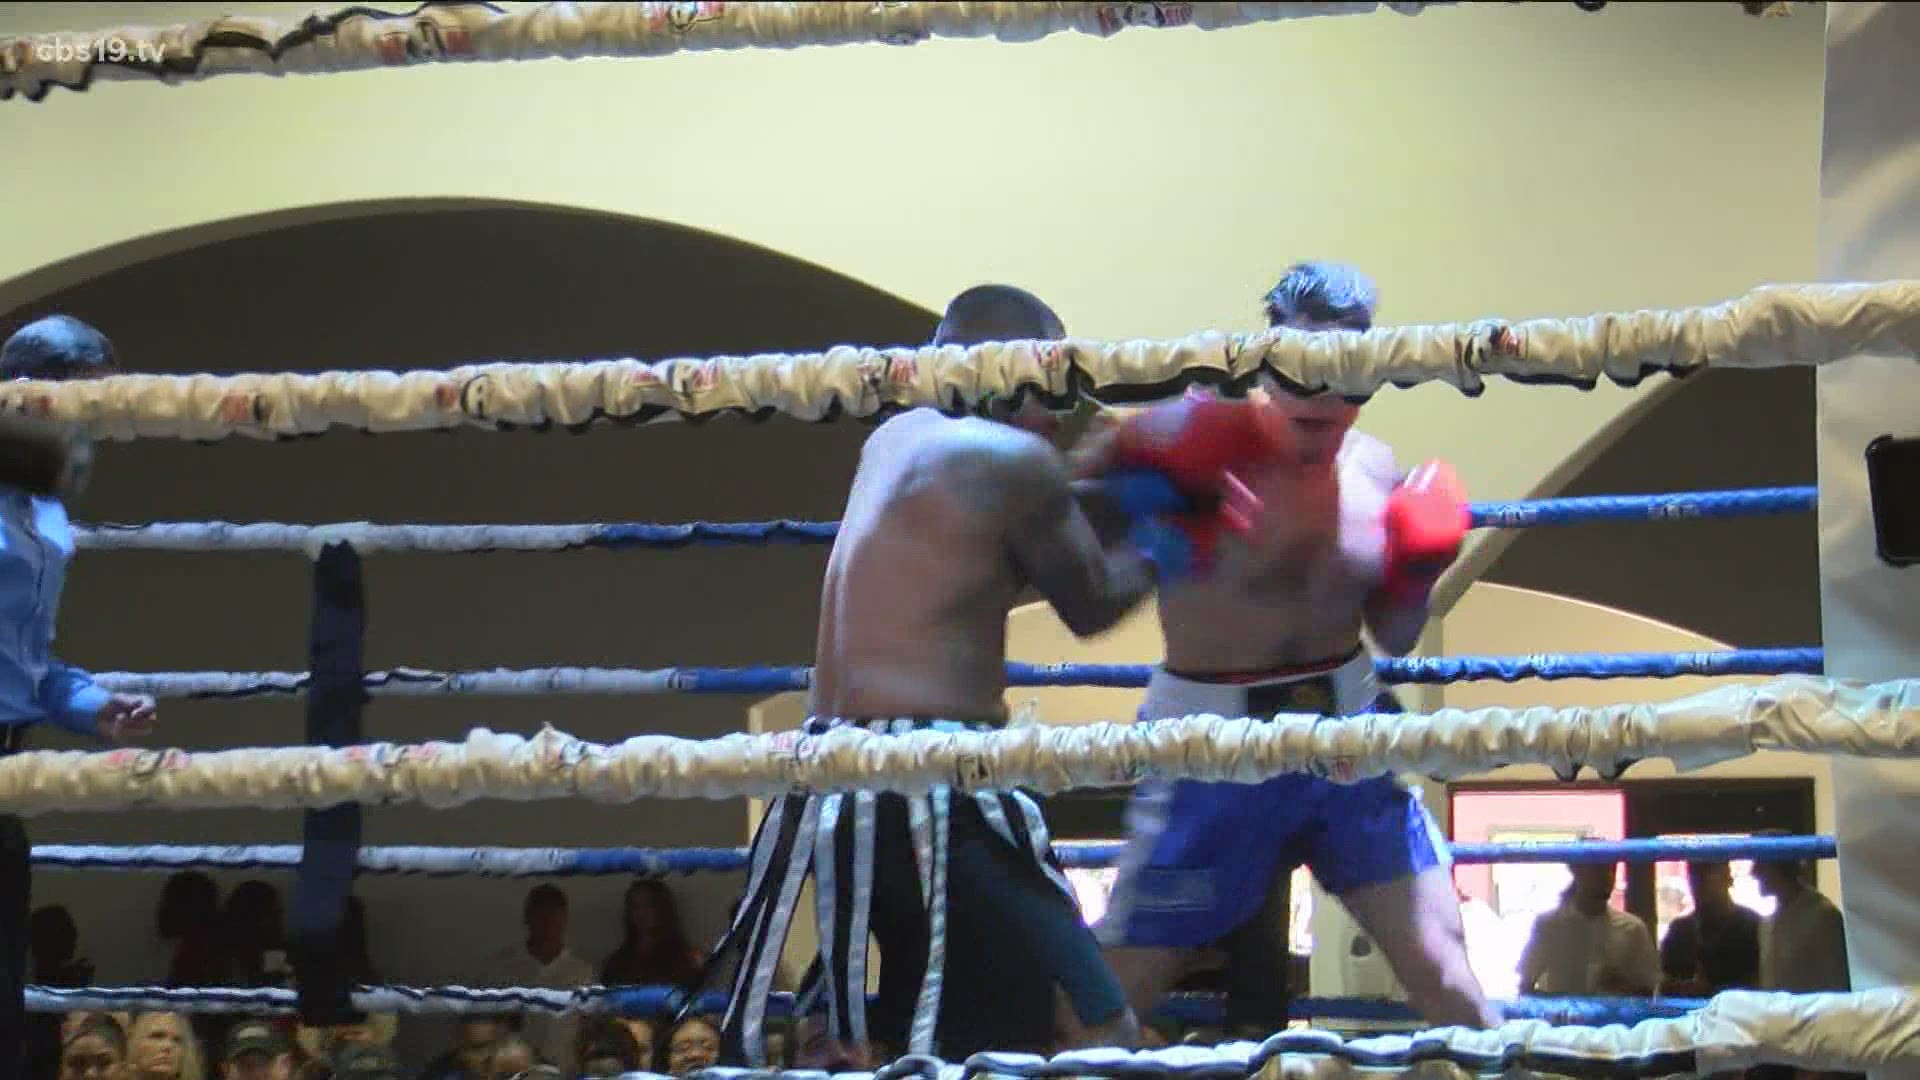 Some of the best boxers from Tyler and the surrounding areas were in action Saturday for a great night of boxing.